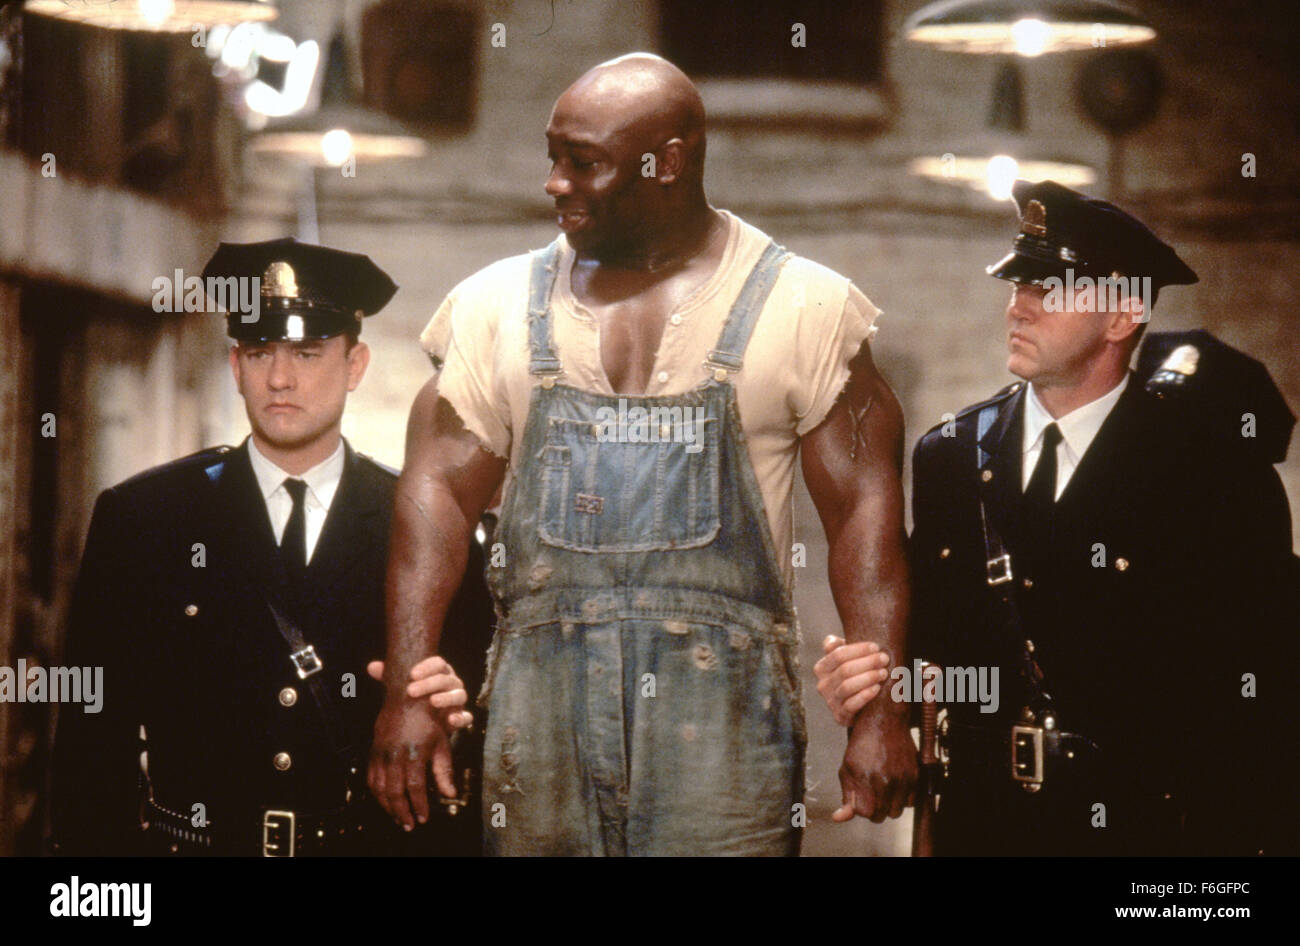 RELEASE DATE: 10 December 1999. MOVIE TITLE: The Green Mile. STUDIO: Castle Rock Entertainment. PLOT: The story about the lives of guards on death row leading up to the execution of black man accused of child murder and rape, who has the power of faith healing. PICTURED: TOM HANKS as Paul Edgecomb with MICHAEL CLARKE DUNCAN as John Coffey and DAVID MORSE as BrutusBrutal Howell. Stock Photo